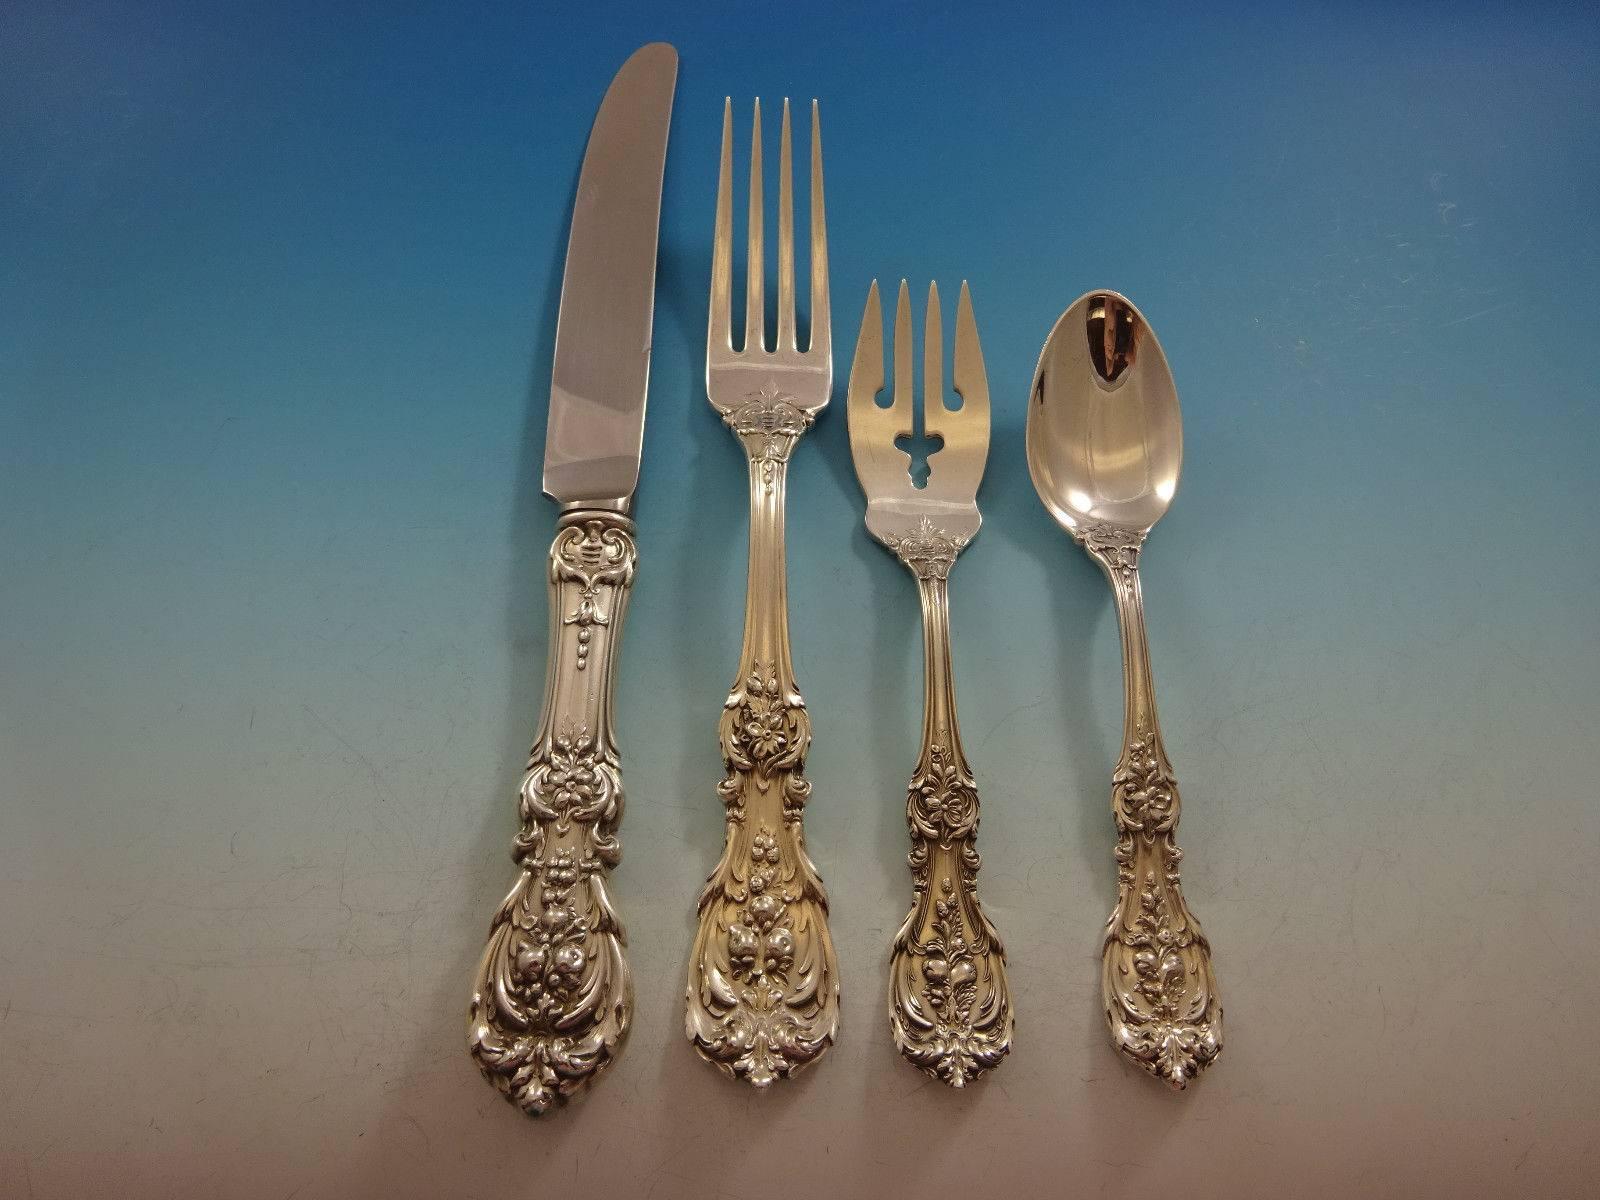 Gorgeous Old Francis I by Reed & Barton Dinner Size sterling silver flatware set - 67 pieces. This set includes: 

12 Dinner Size Knives, 9 3/4